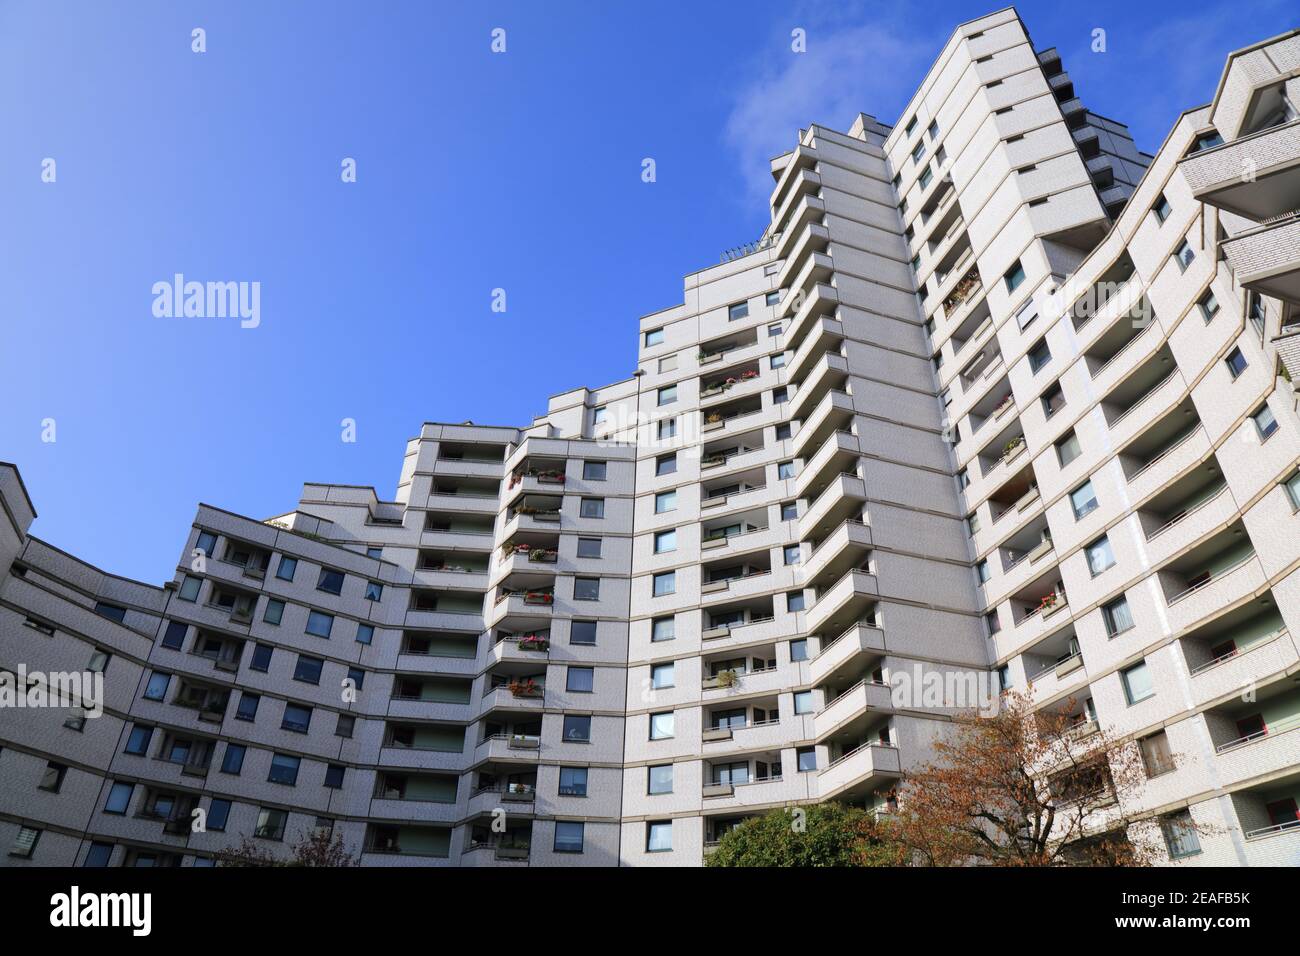 GELSENKIRCHEN, GERMANY - SEPTEMBER 17, 2020: Aparment building in Gelsenkirchen, Germany. Official name of the building is City-Wohnanlage, but locals Stock Photo